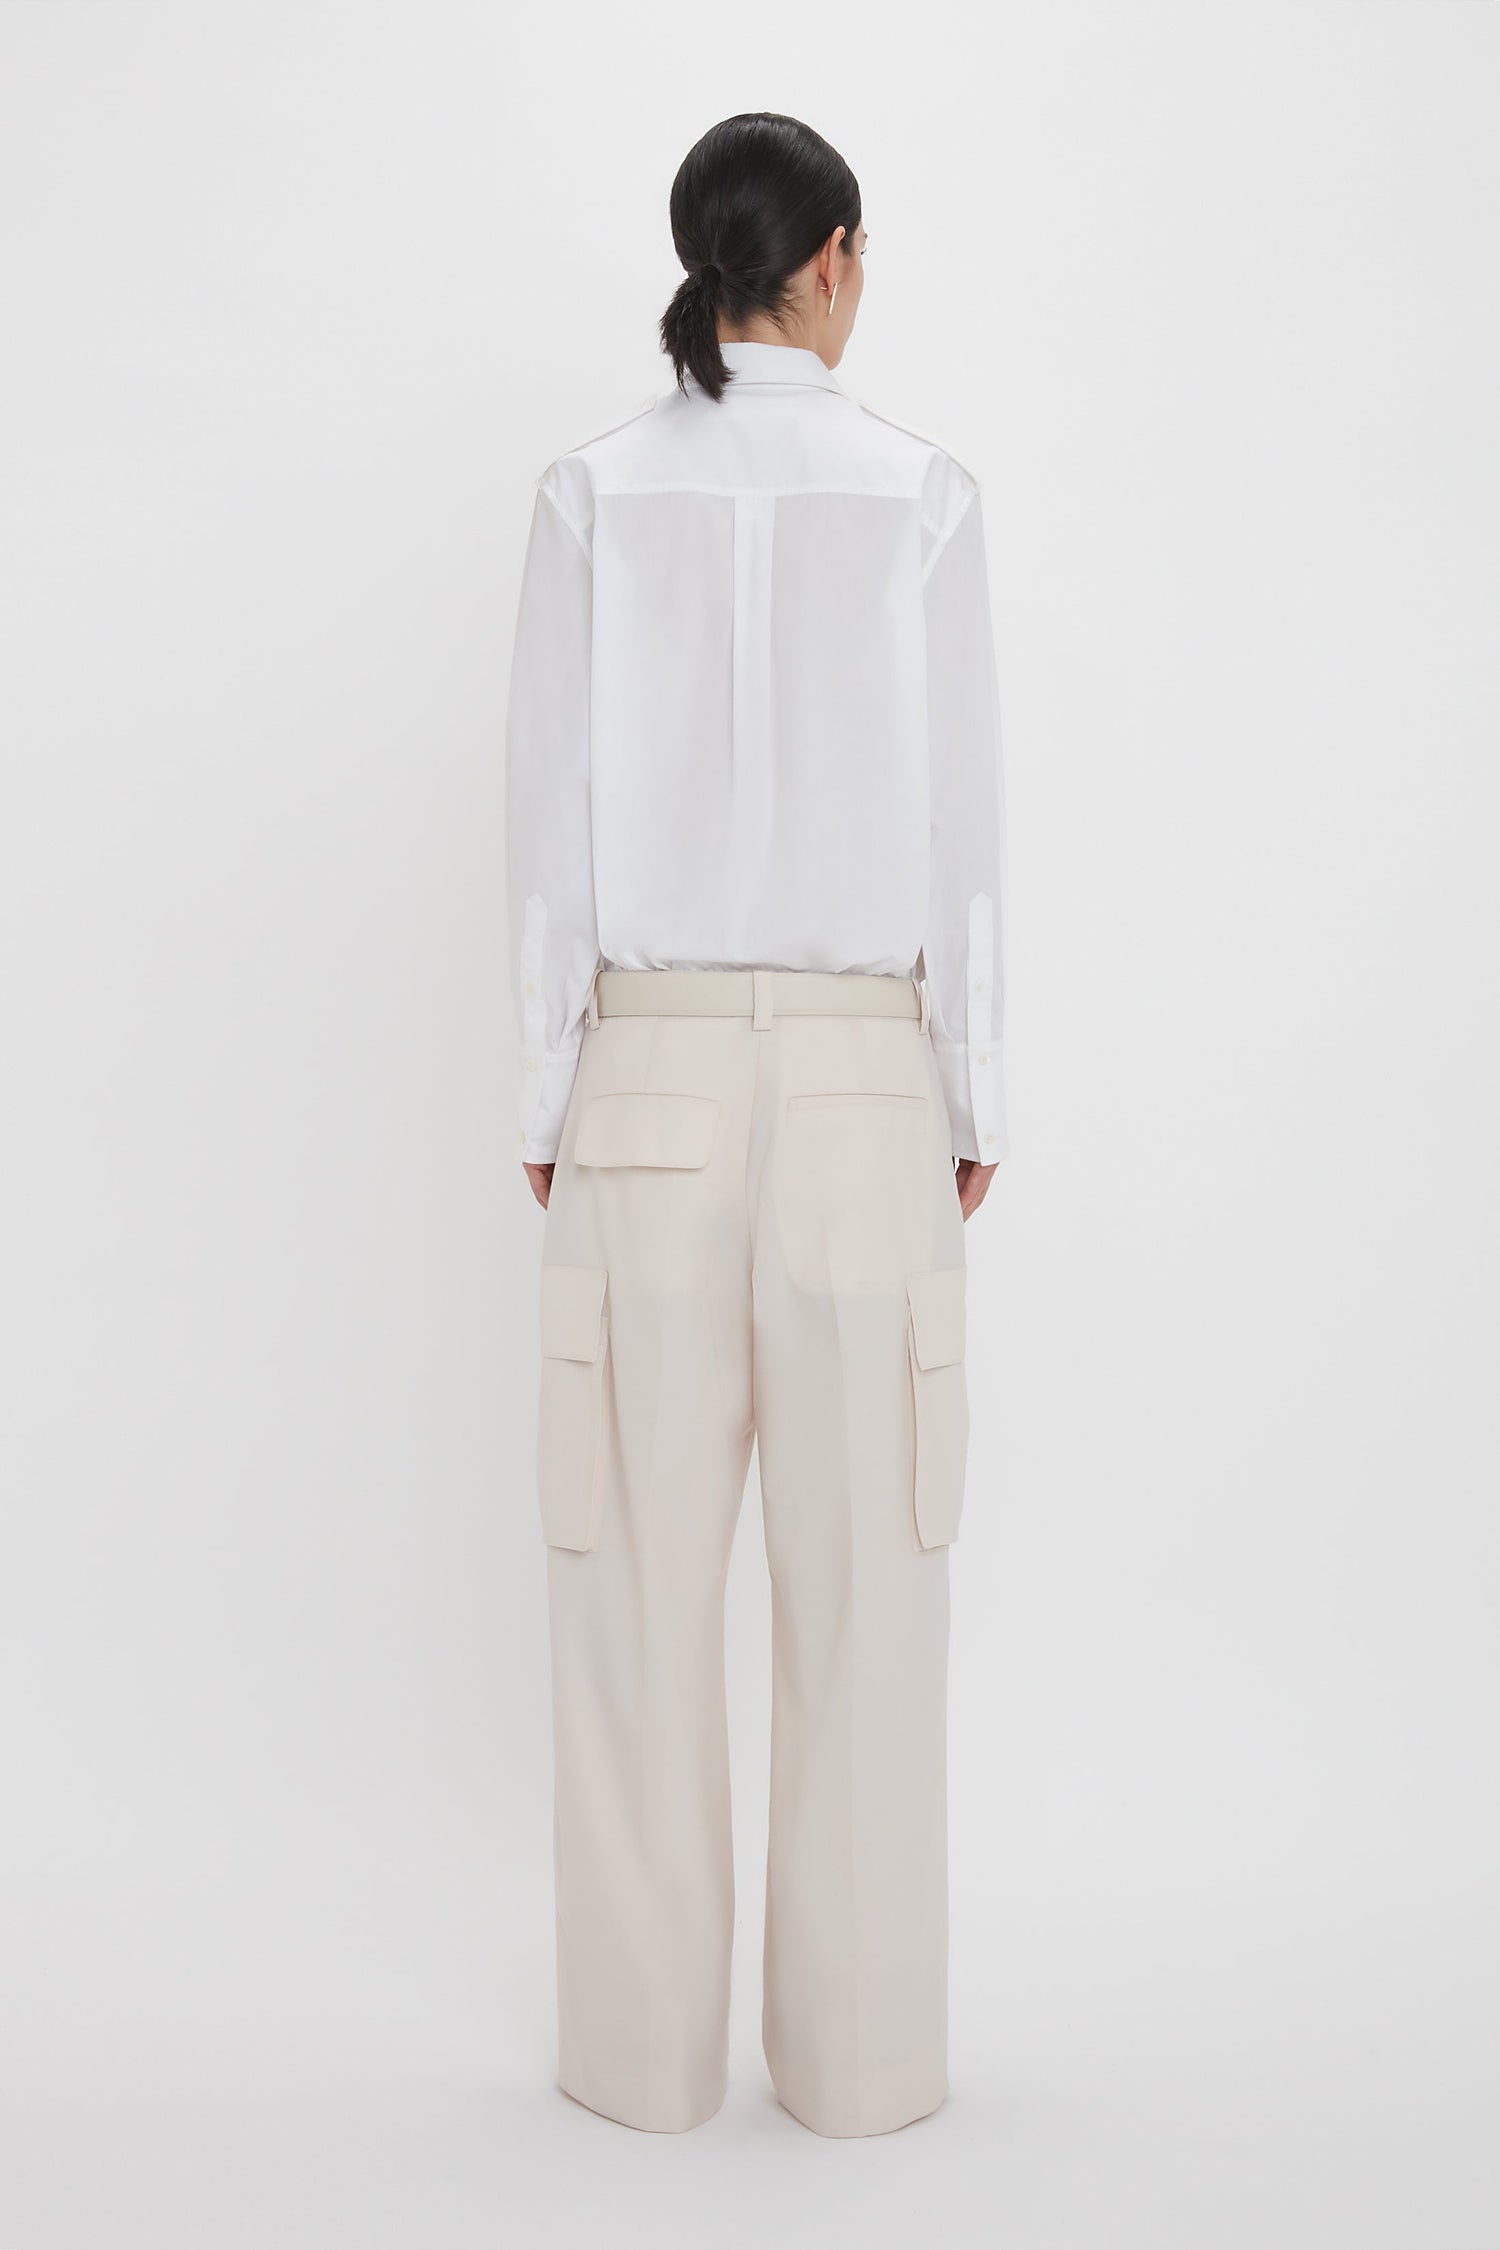 A person with dark hair is standing and facing away, wearing an Oversized Pocket Shirt In White by Victoria Beckham made of organic cotton paired with beige high-waisted pants featuring large pockets, showcasing modern sophistication.